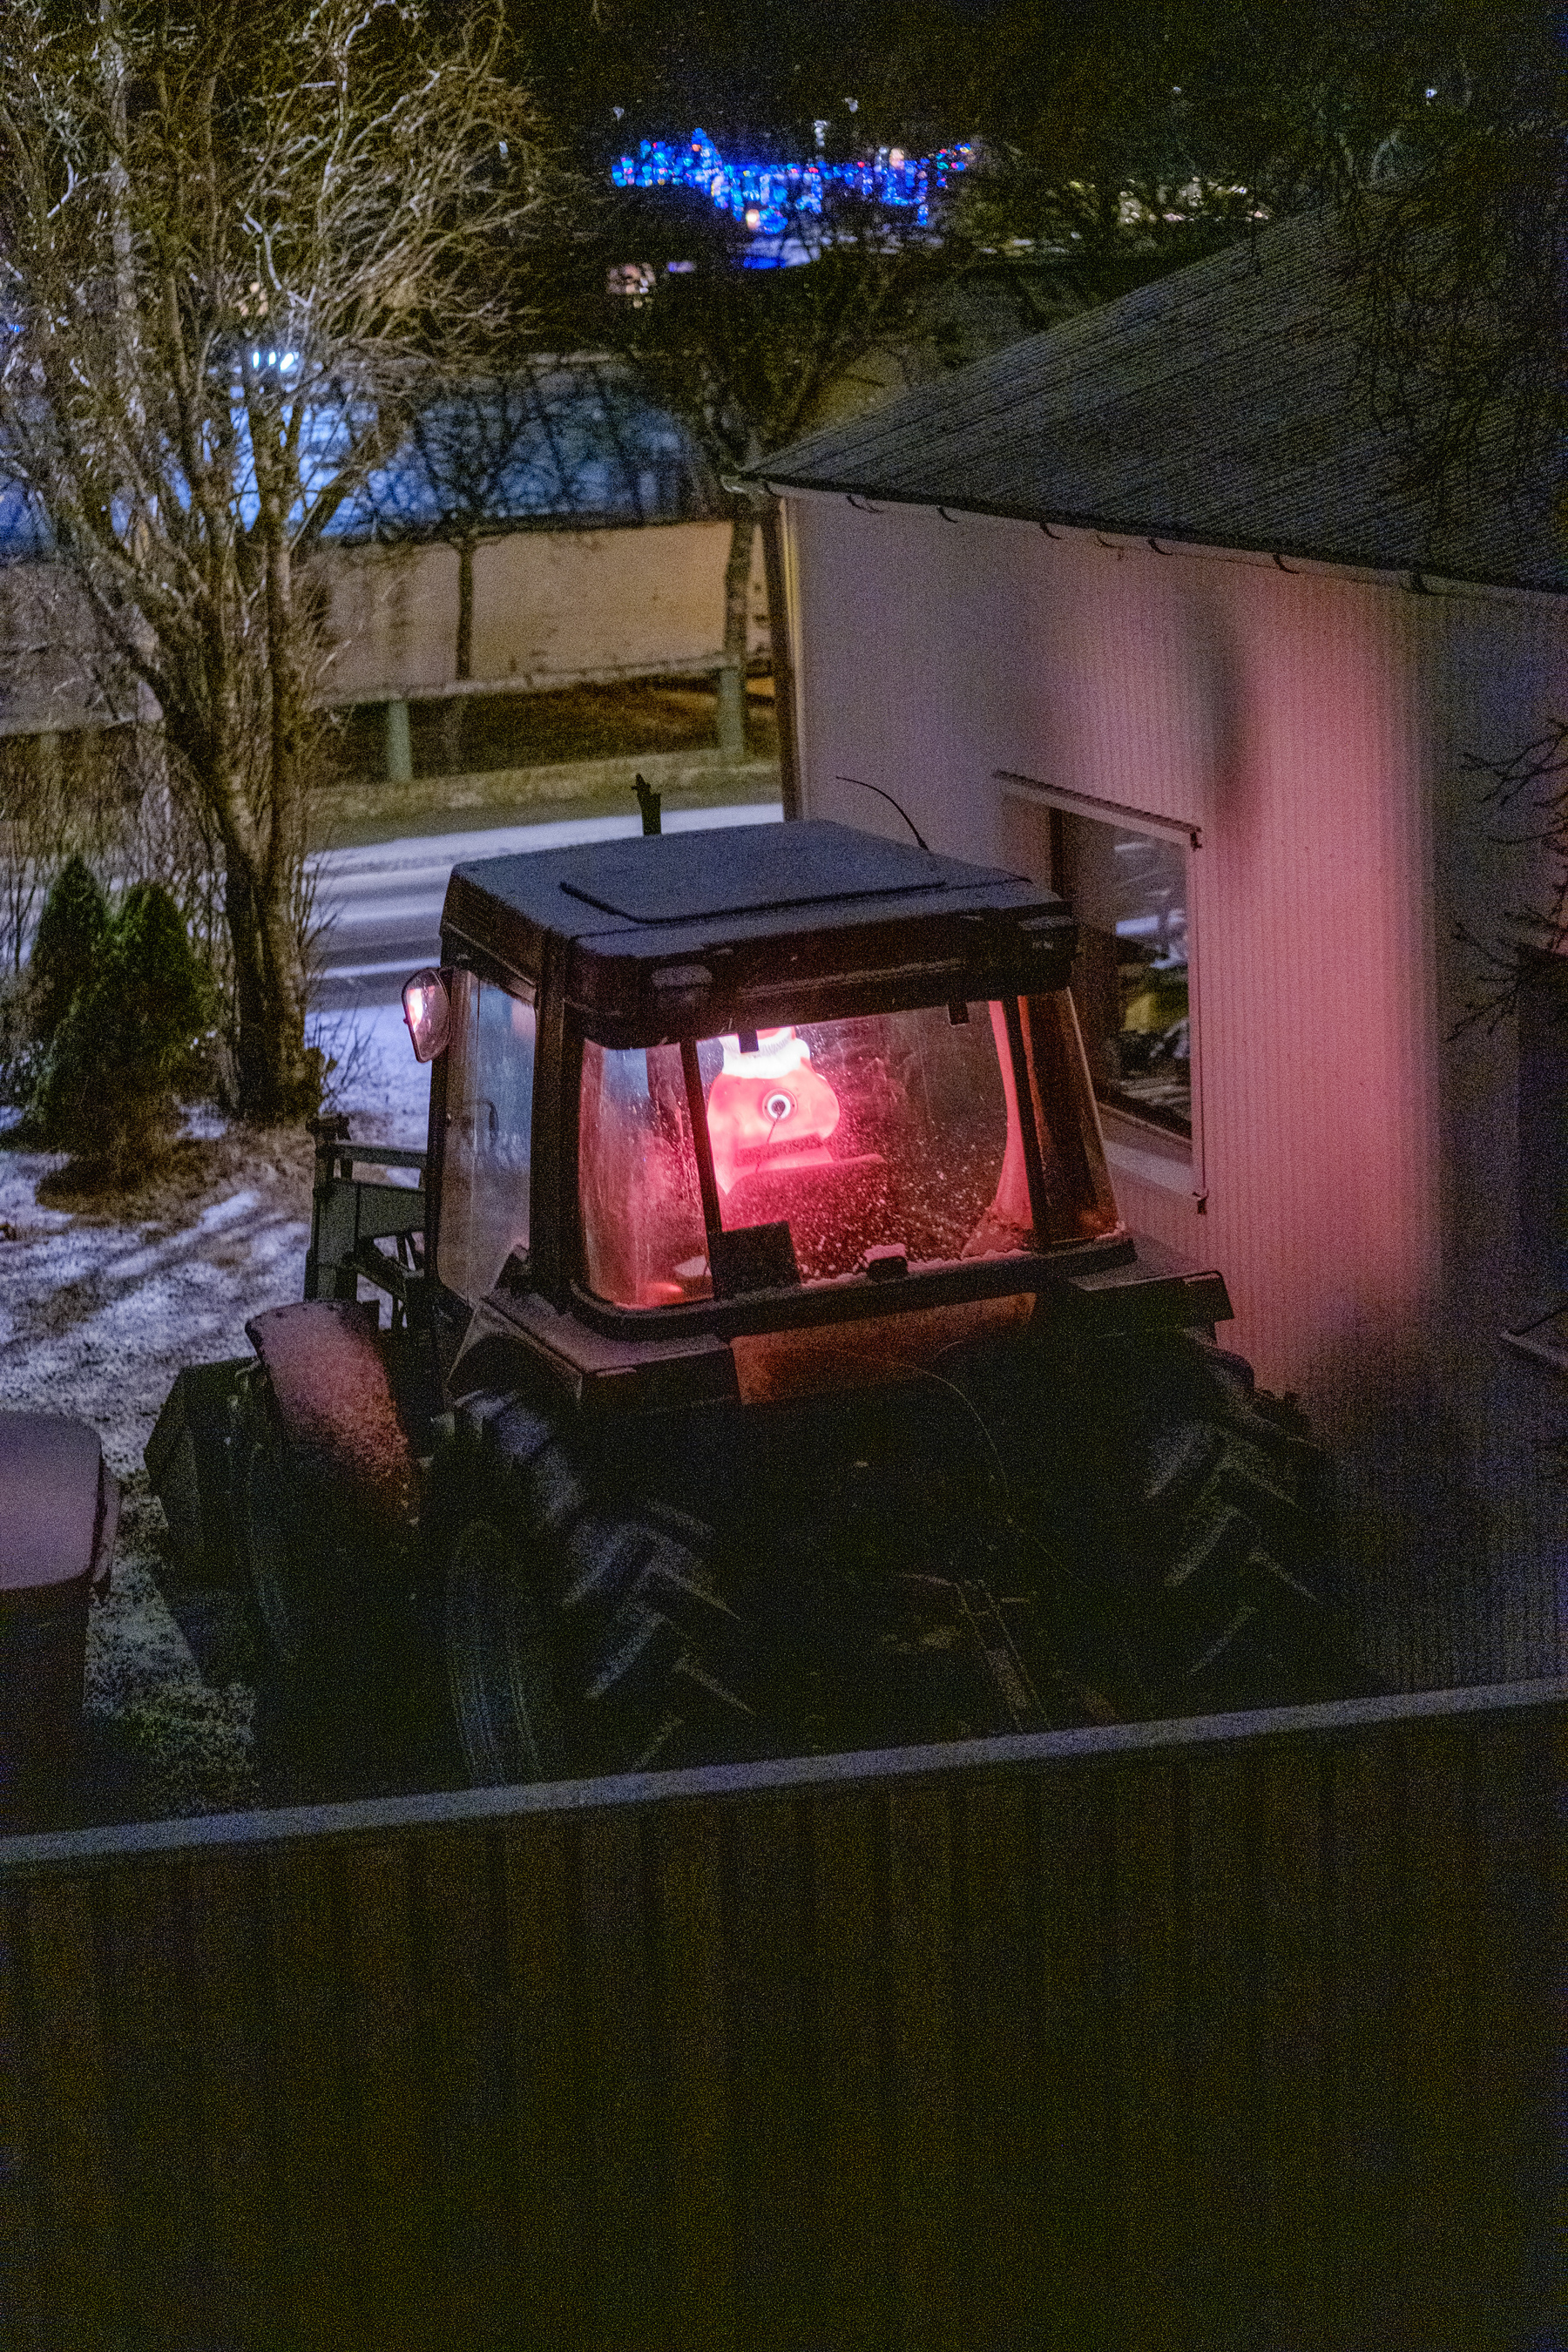 A tractor parked next to a garage. It’s night and the light-up Santa in the tractor’s driver’s seat lights up the wall.